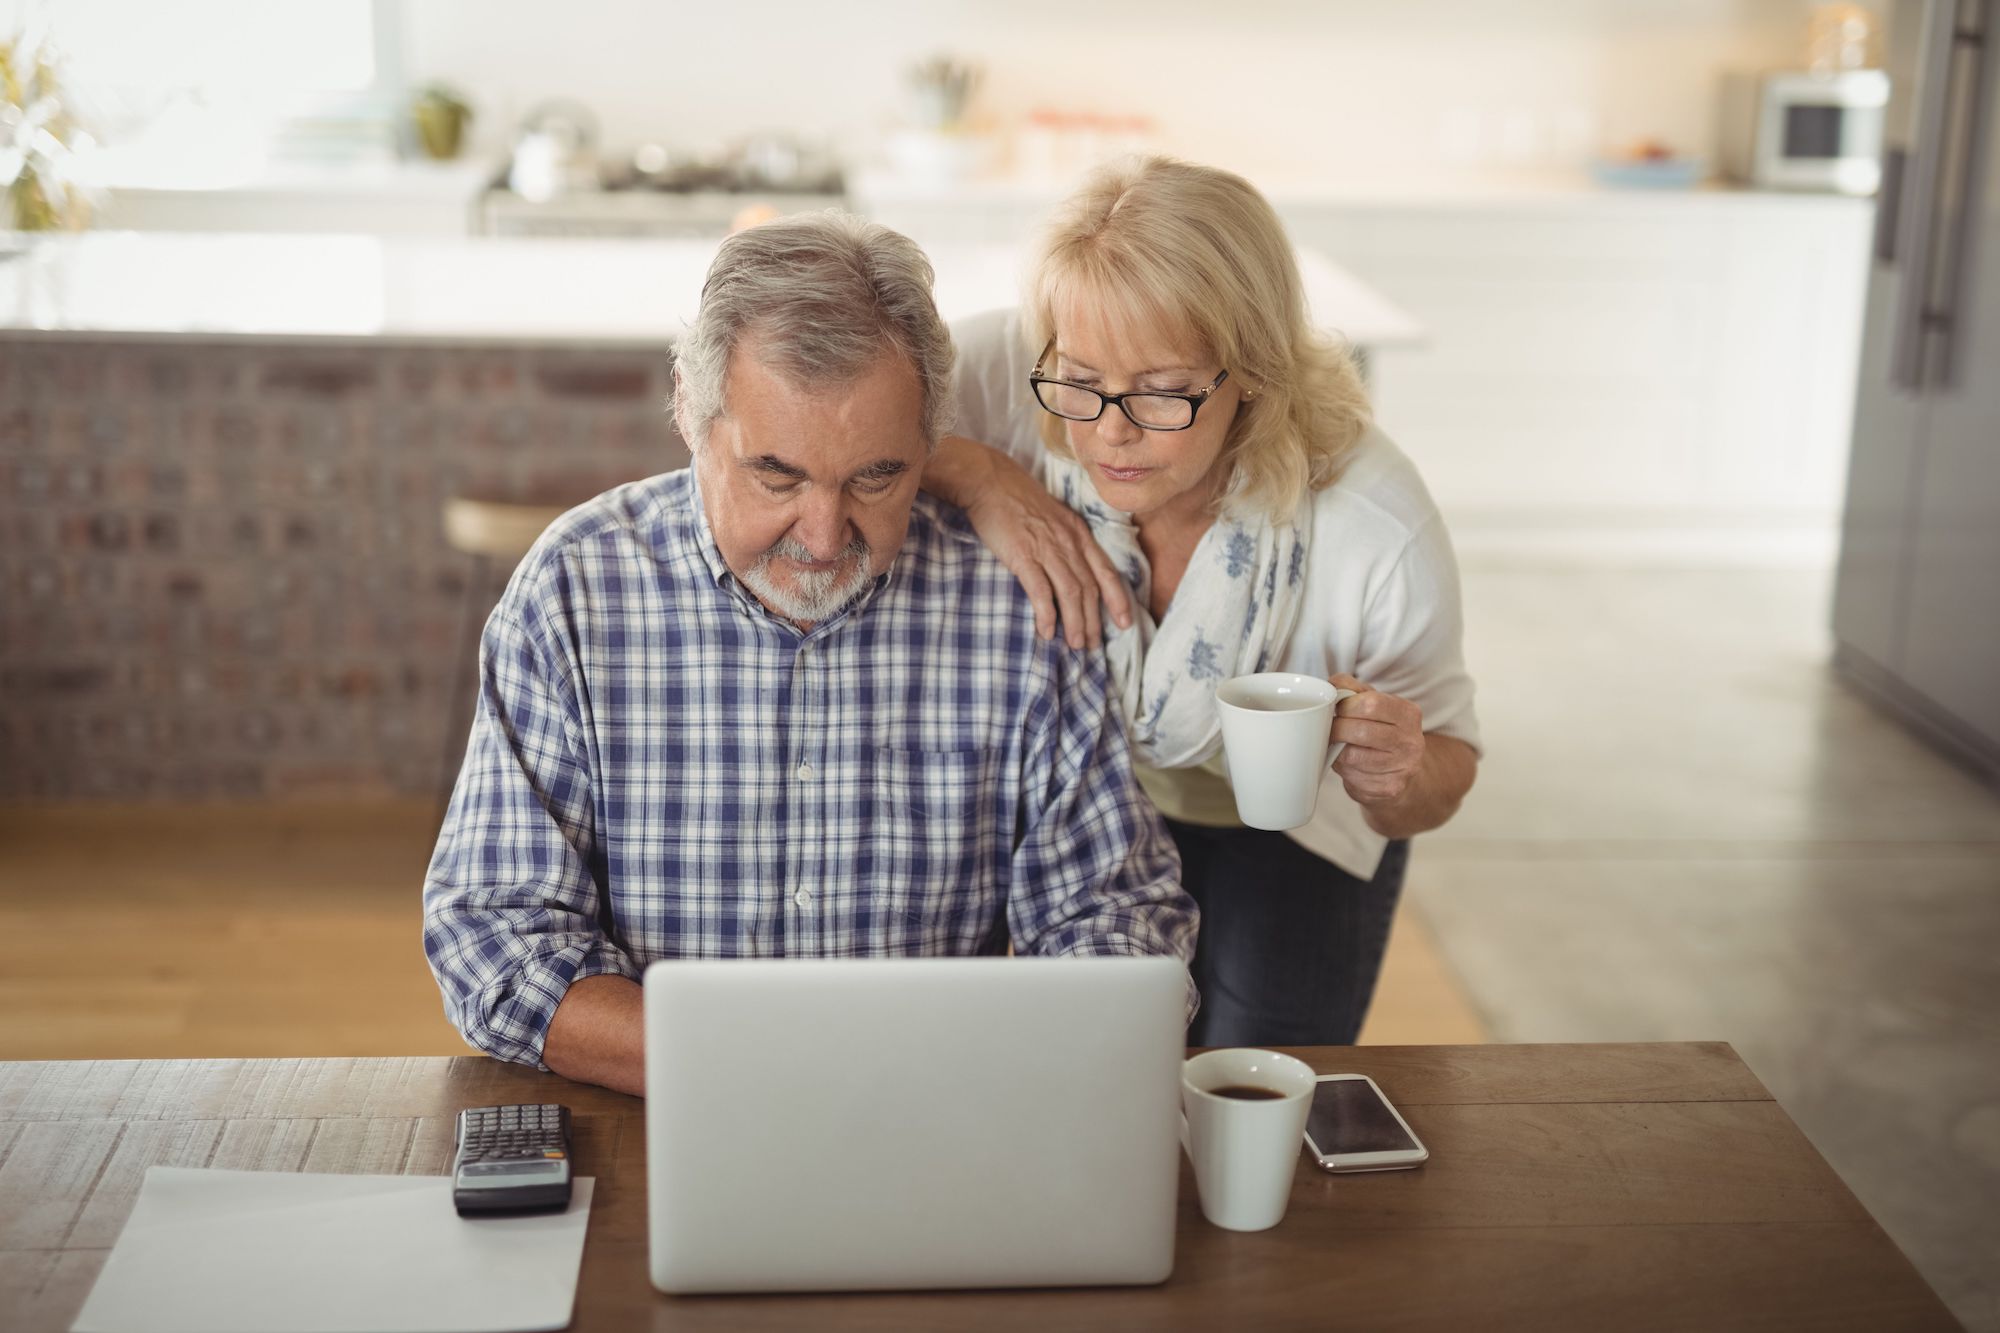 Movement Offers Older Americans ‘Digital Gateway’ to Retirement ‘With Purpose’